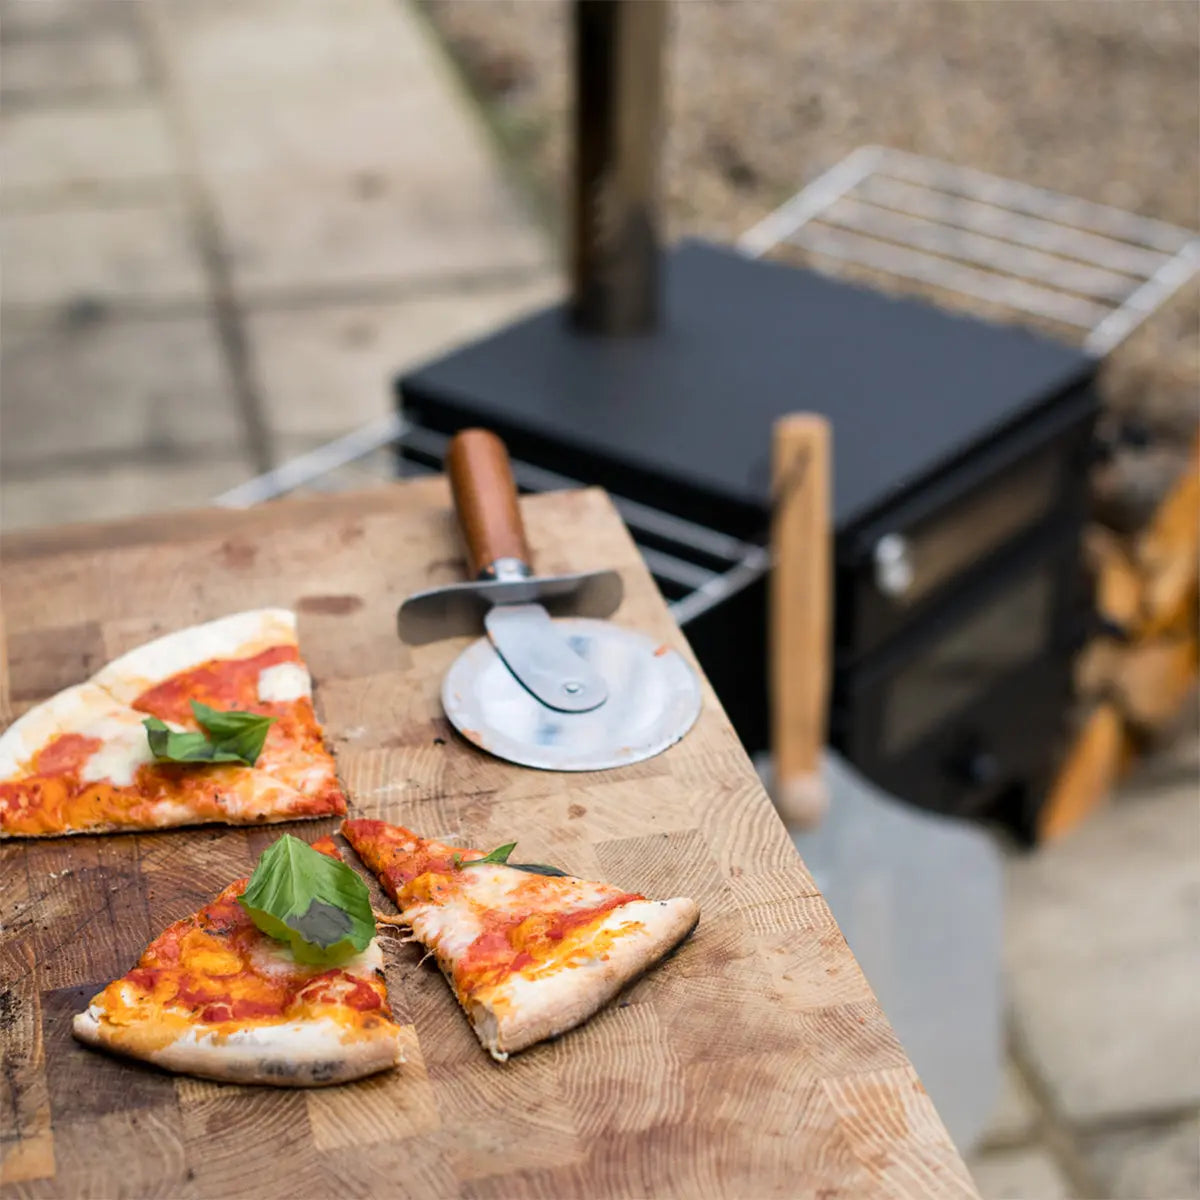 The Original Pizza Oven Wood Burning Stove